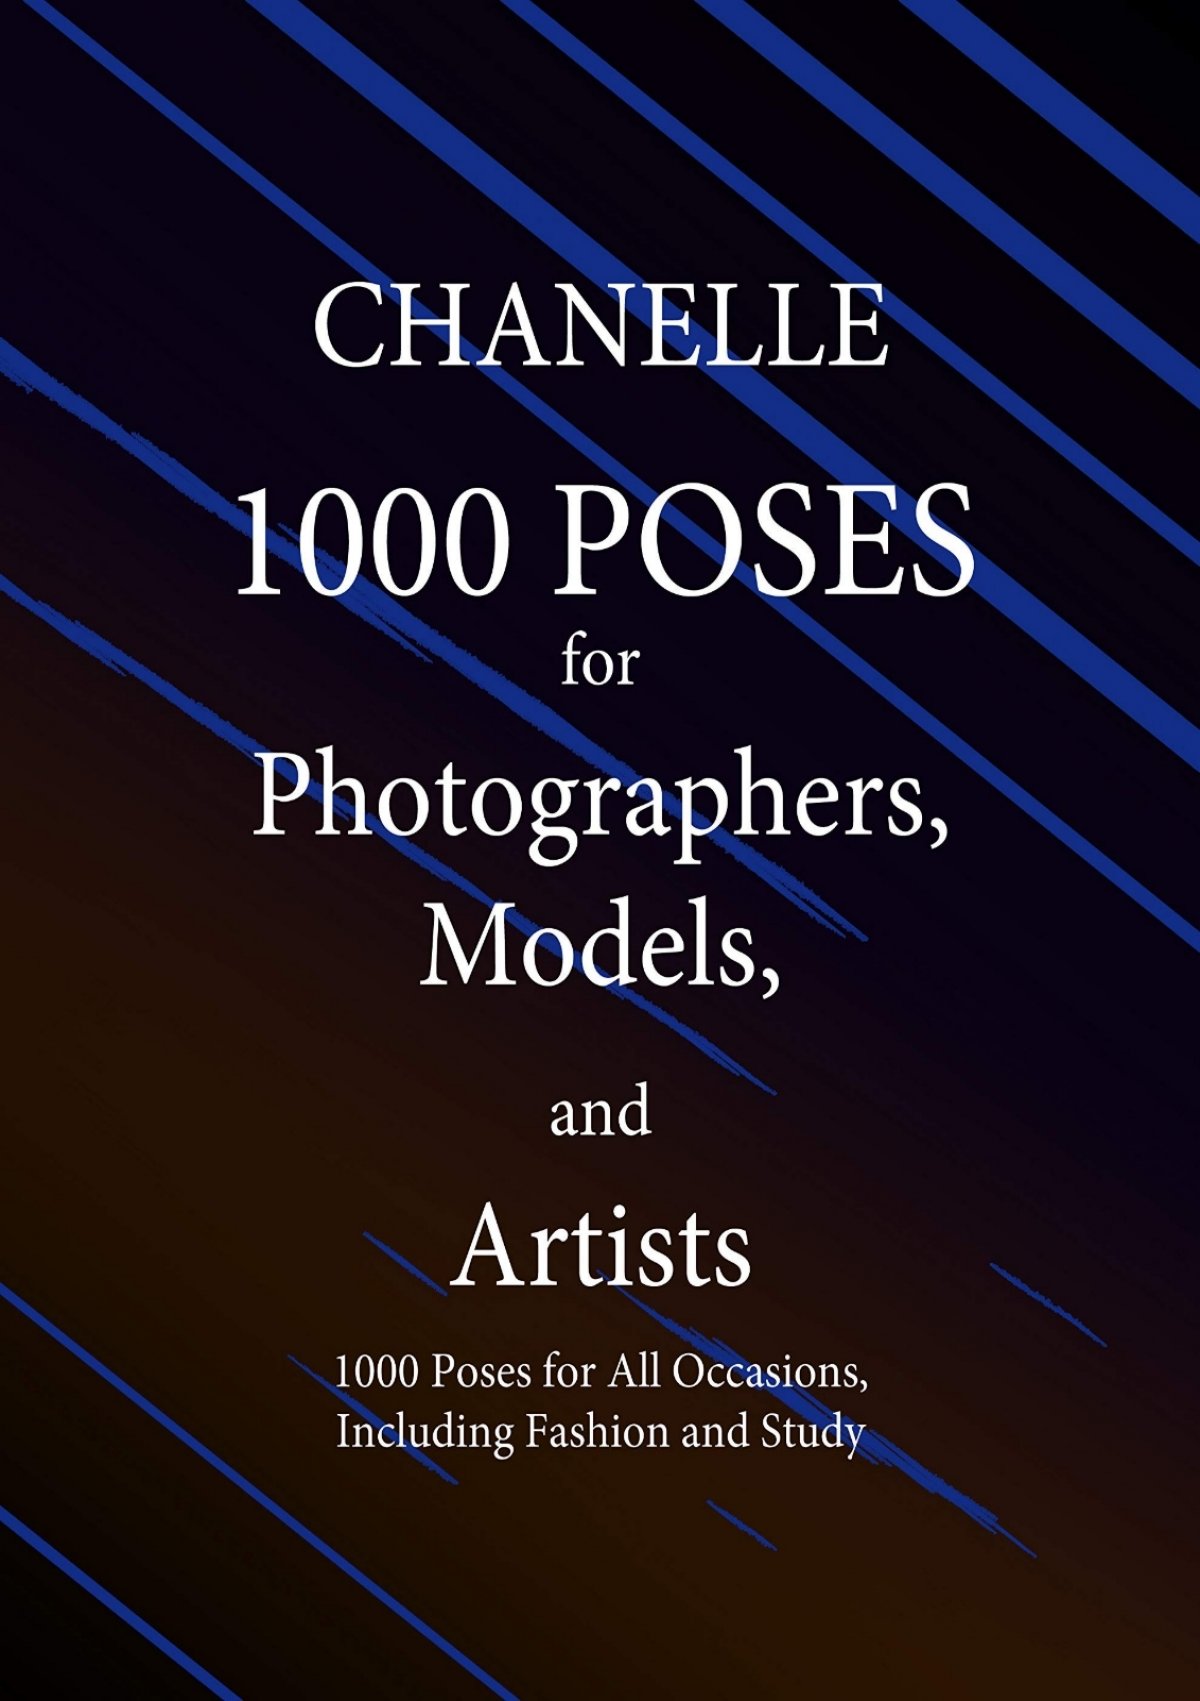 500 Poses for Photographing Full-Length Portraits eBook by Michelle Perkins  - EPUB Book | Rakuten Kobo United States